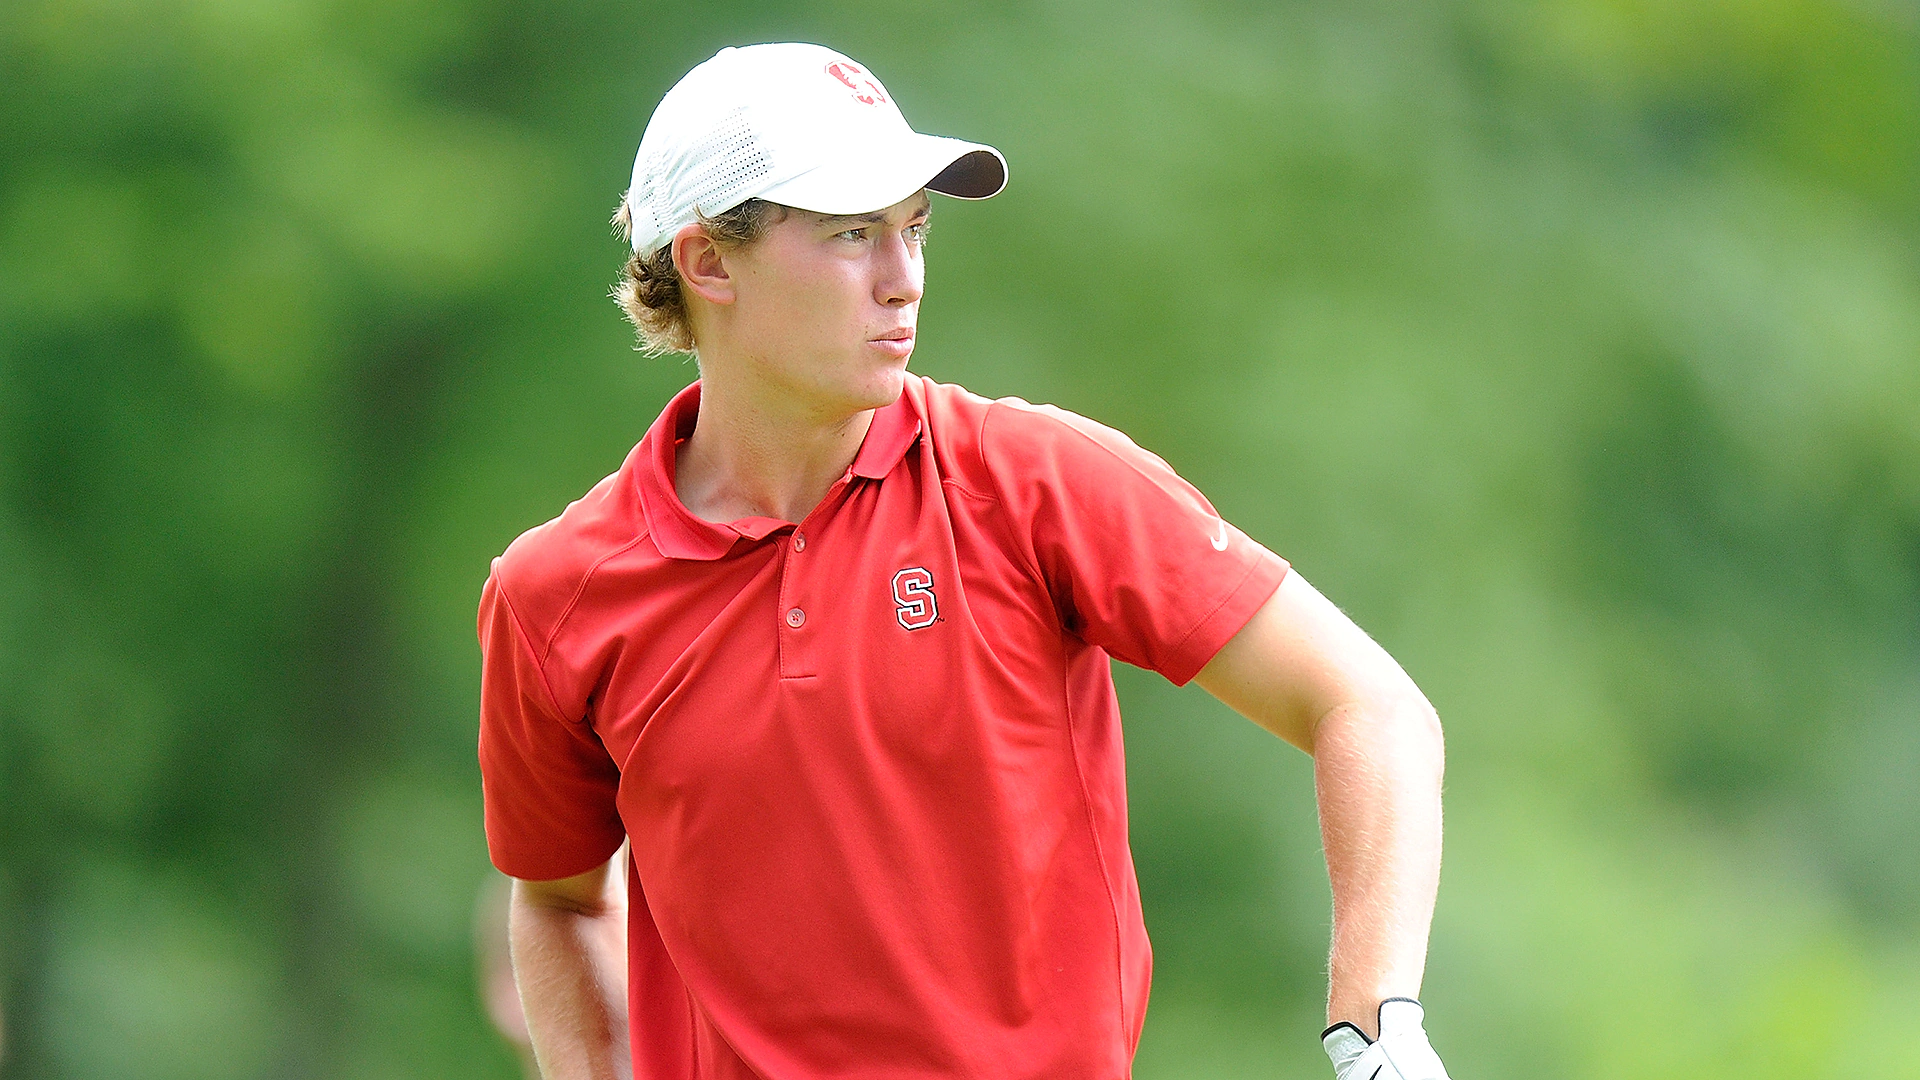 Stanford star McNealy to turn pro, debut in Napa